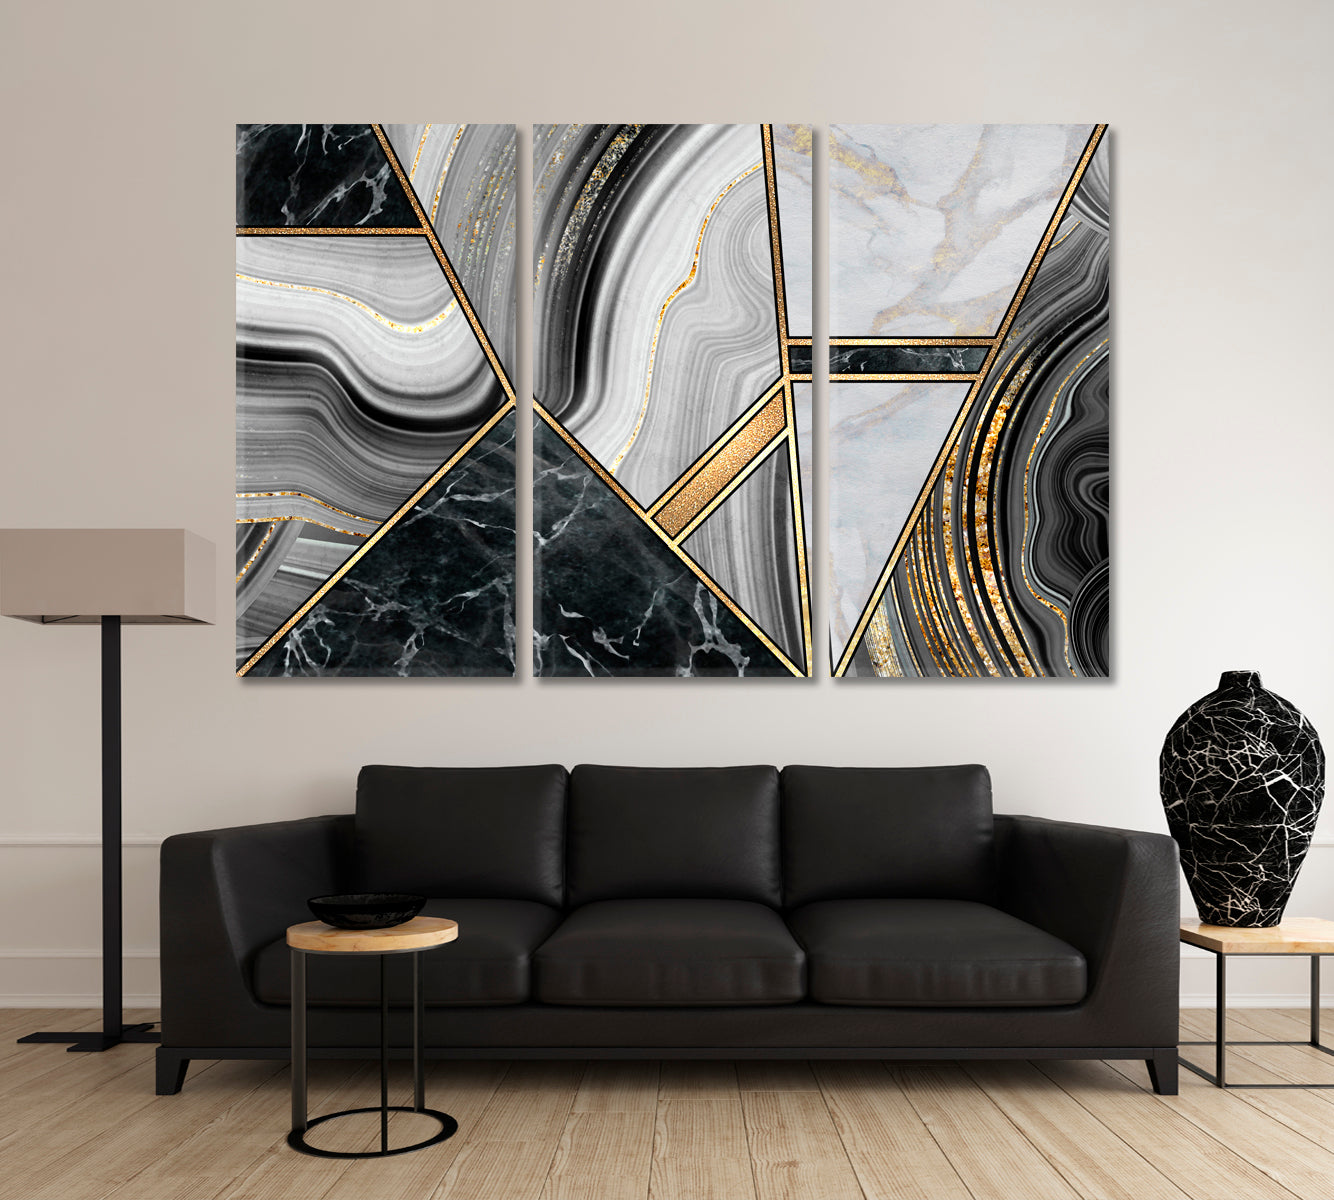 Marble Granite Agate and Gold Abstract Minimalist Art Deco Giclée Print Abstract Art Print Artesty 3 panels 36" x 24" 